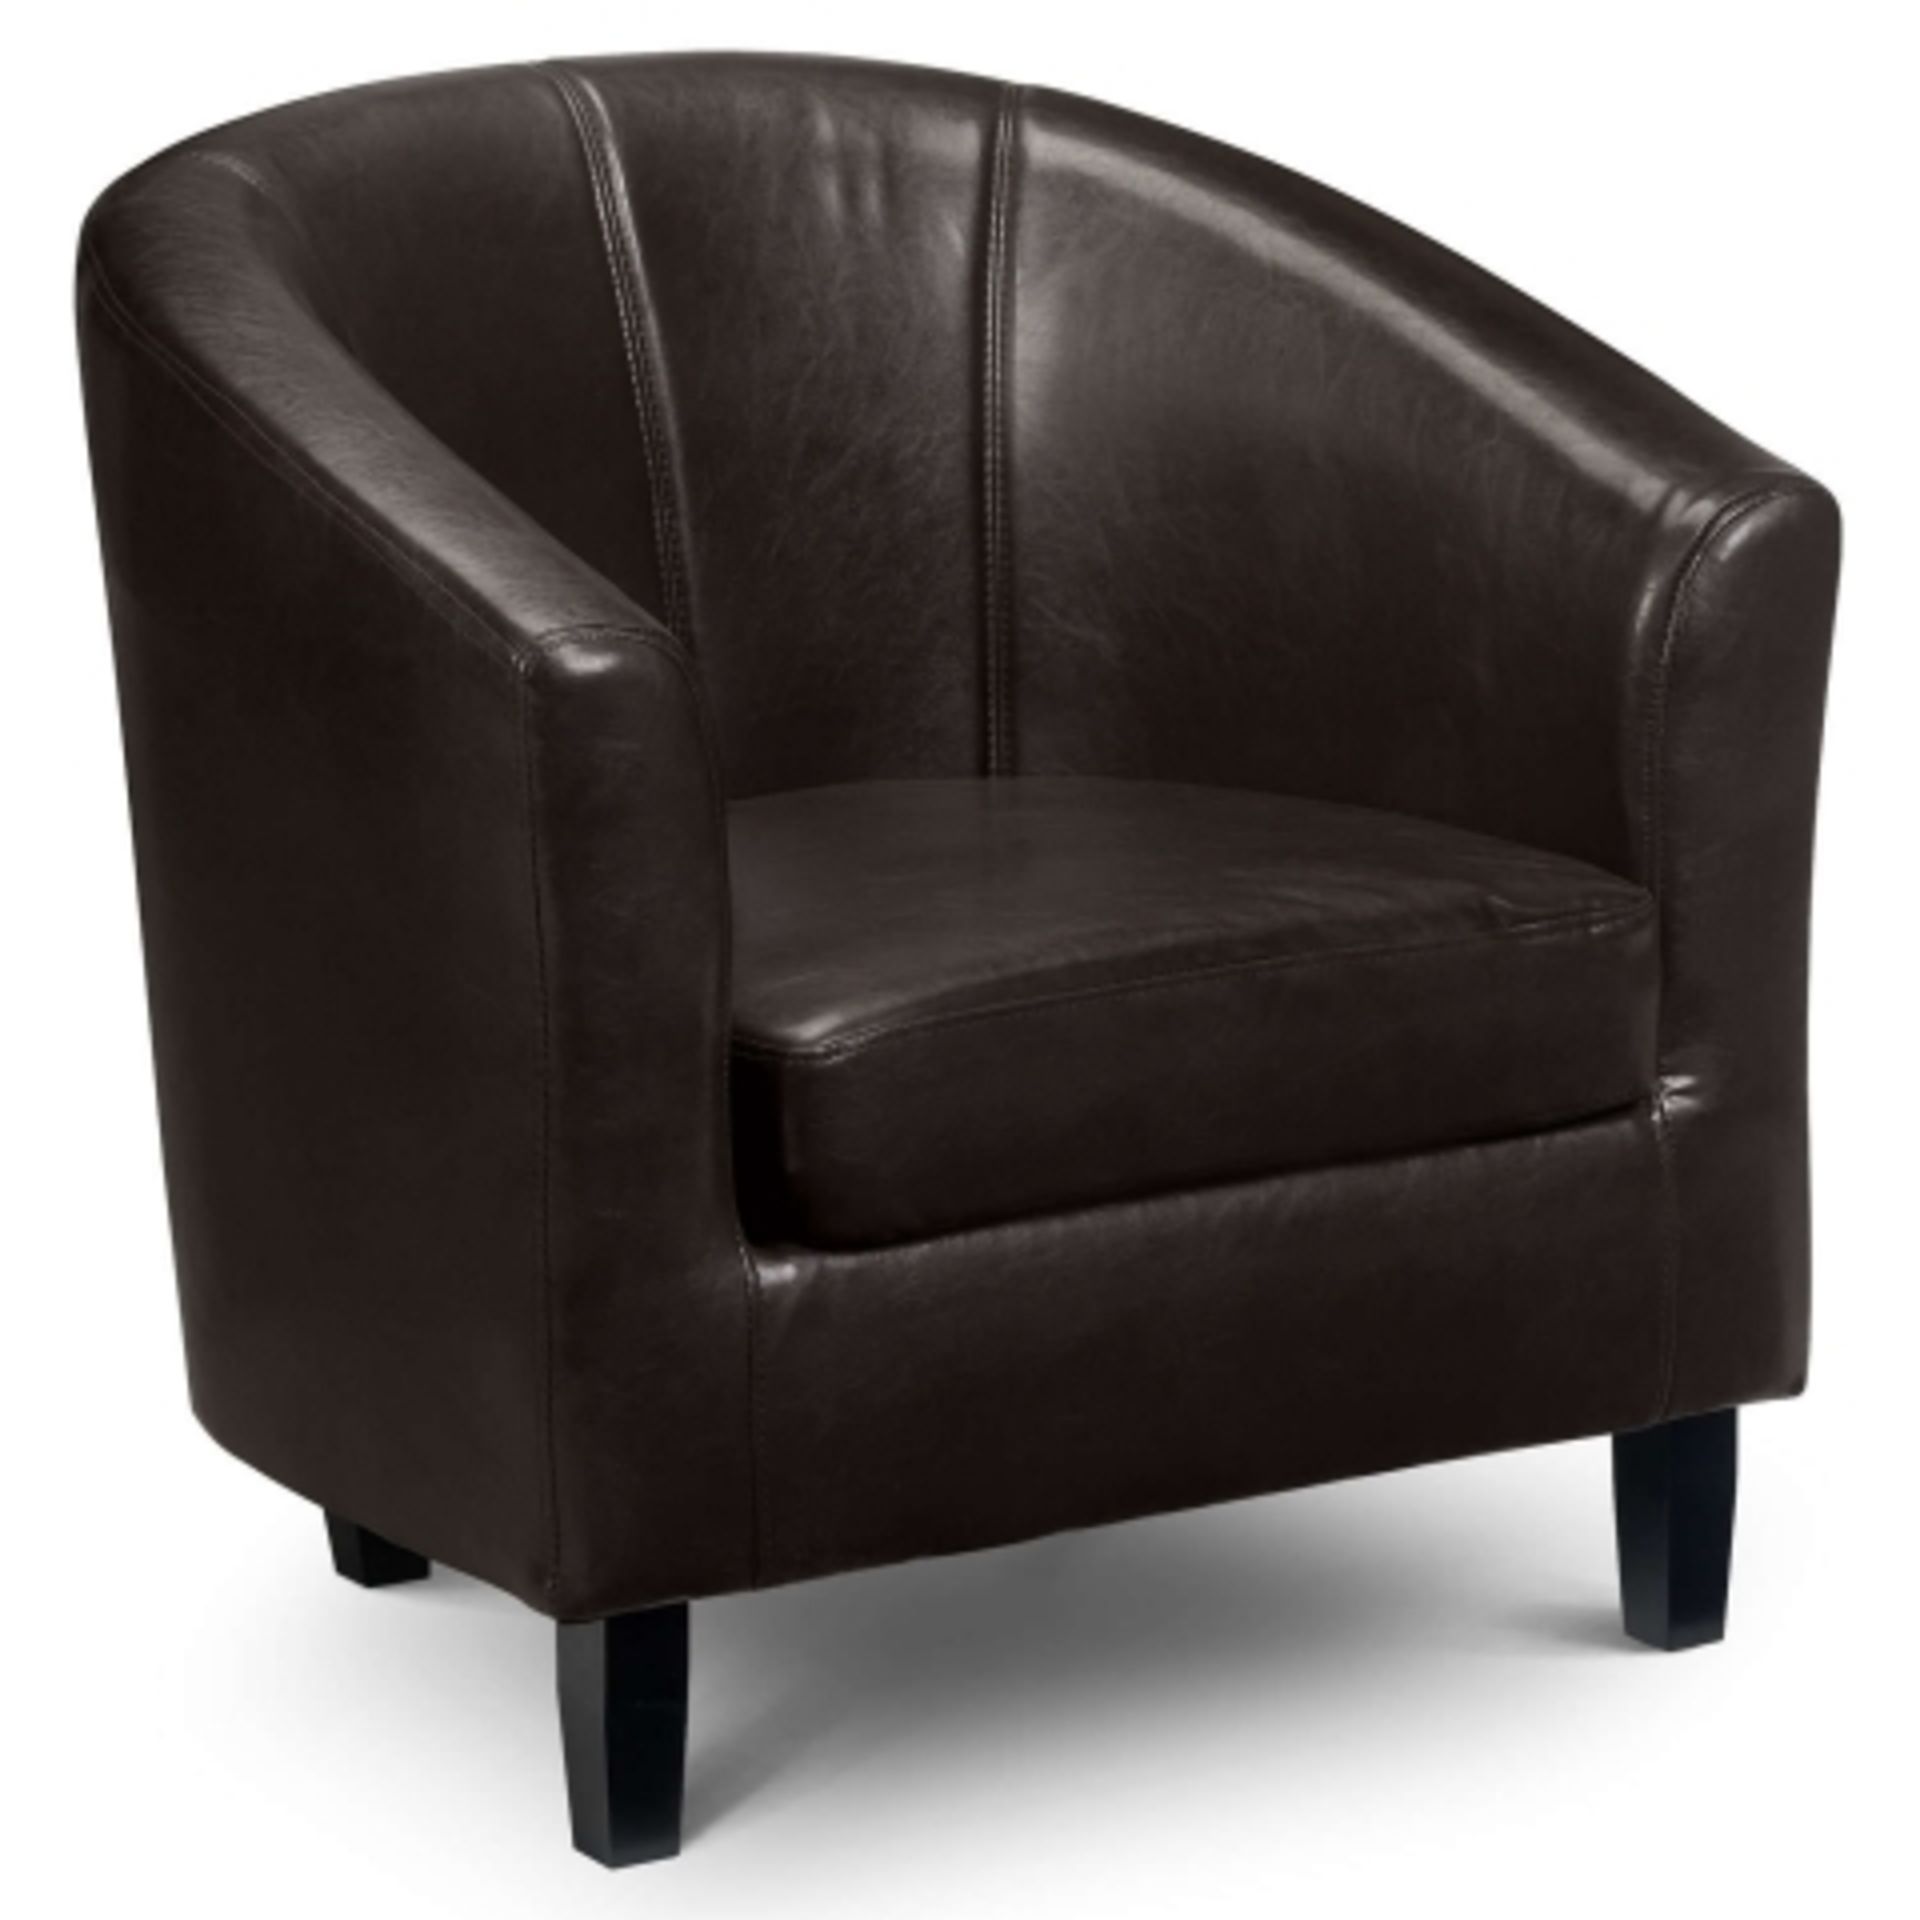 Dark brown faux leather tub chair with dark brown wooden legs